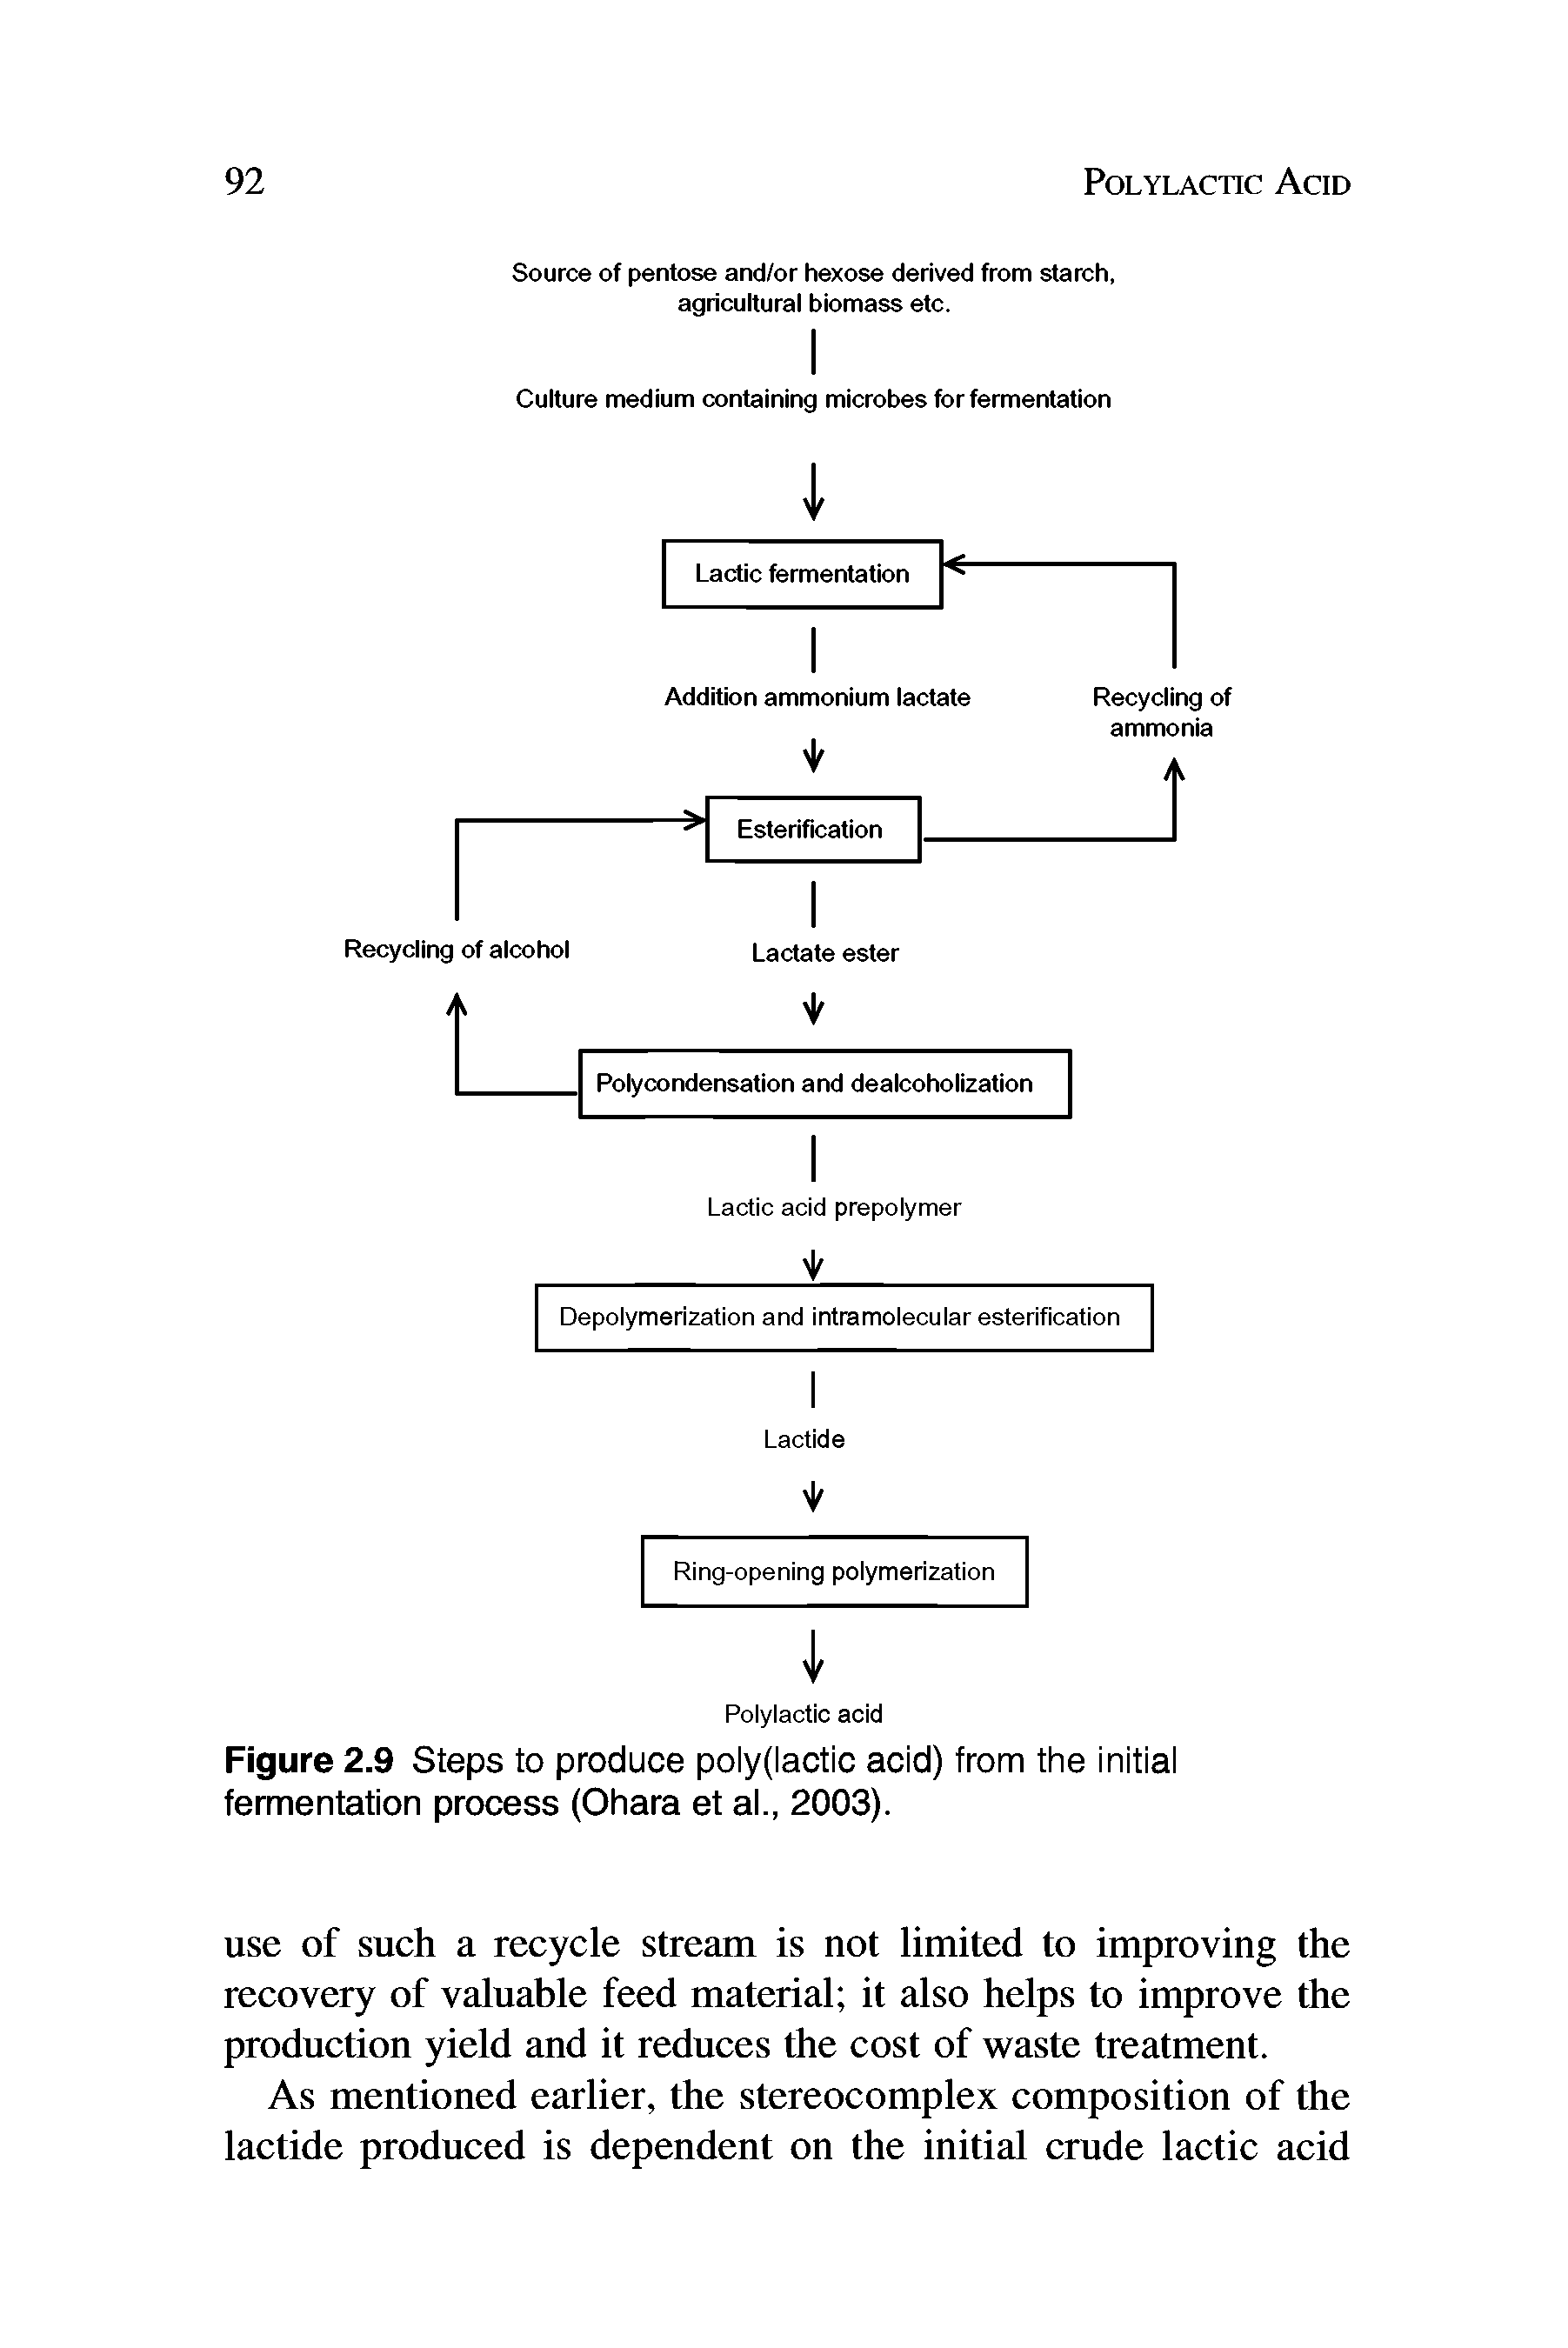 Figure 2.9 Steps to produce poly(lactic acid) from the initial fermentation process (Ohara et al., 2003).